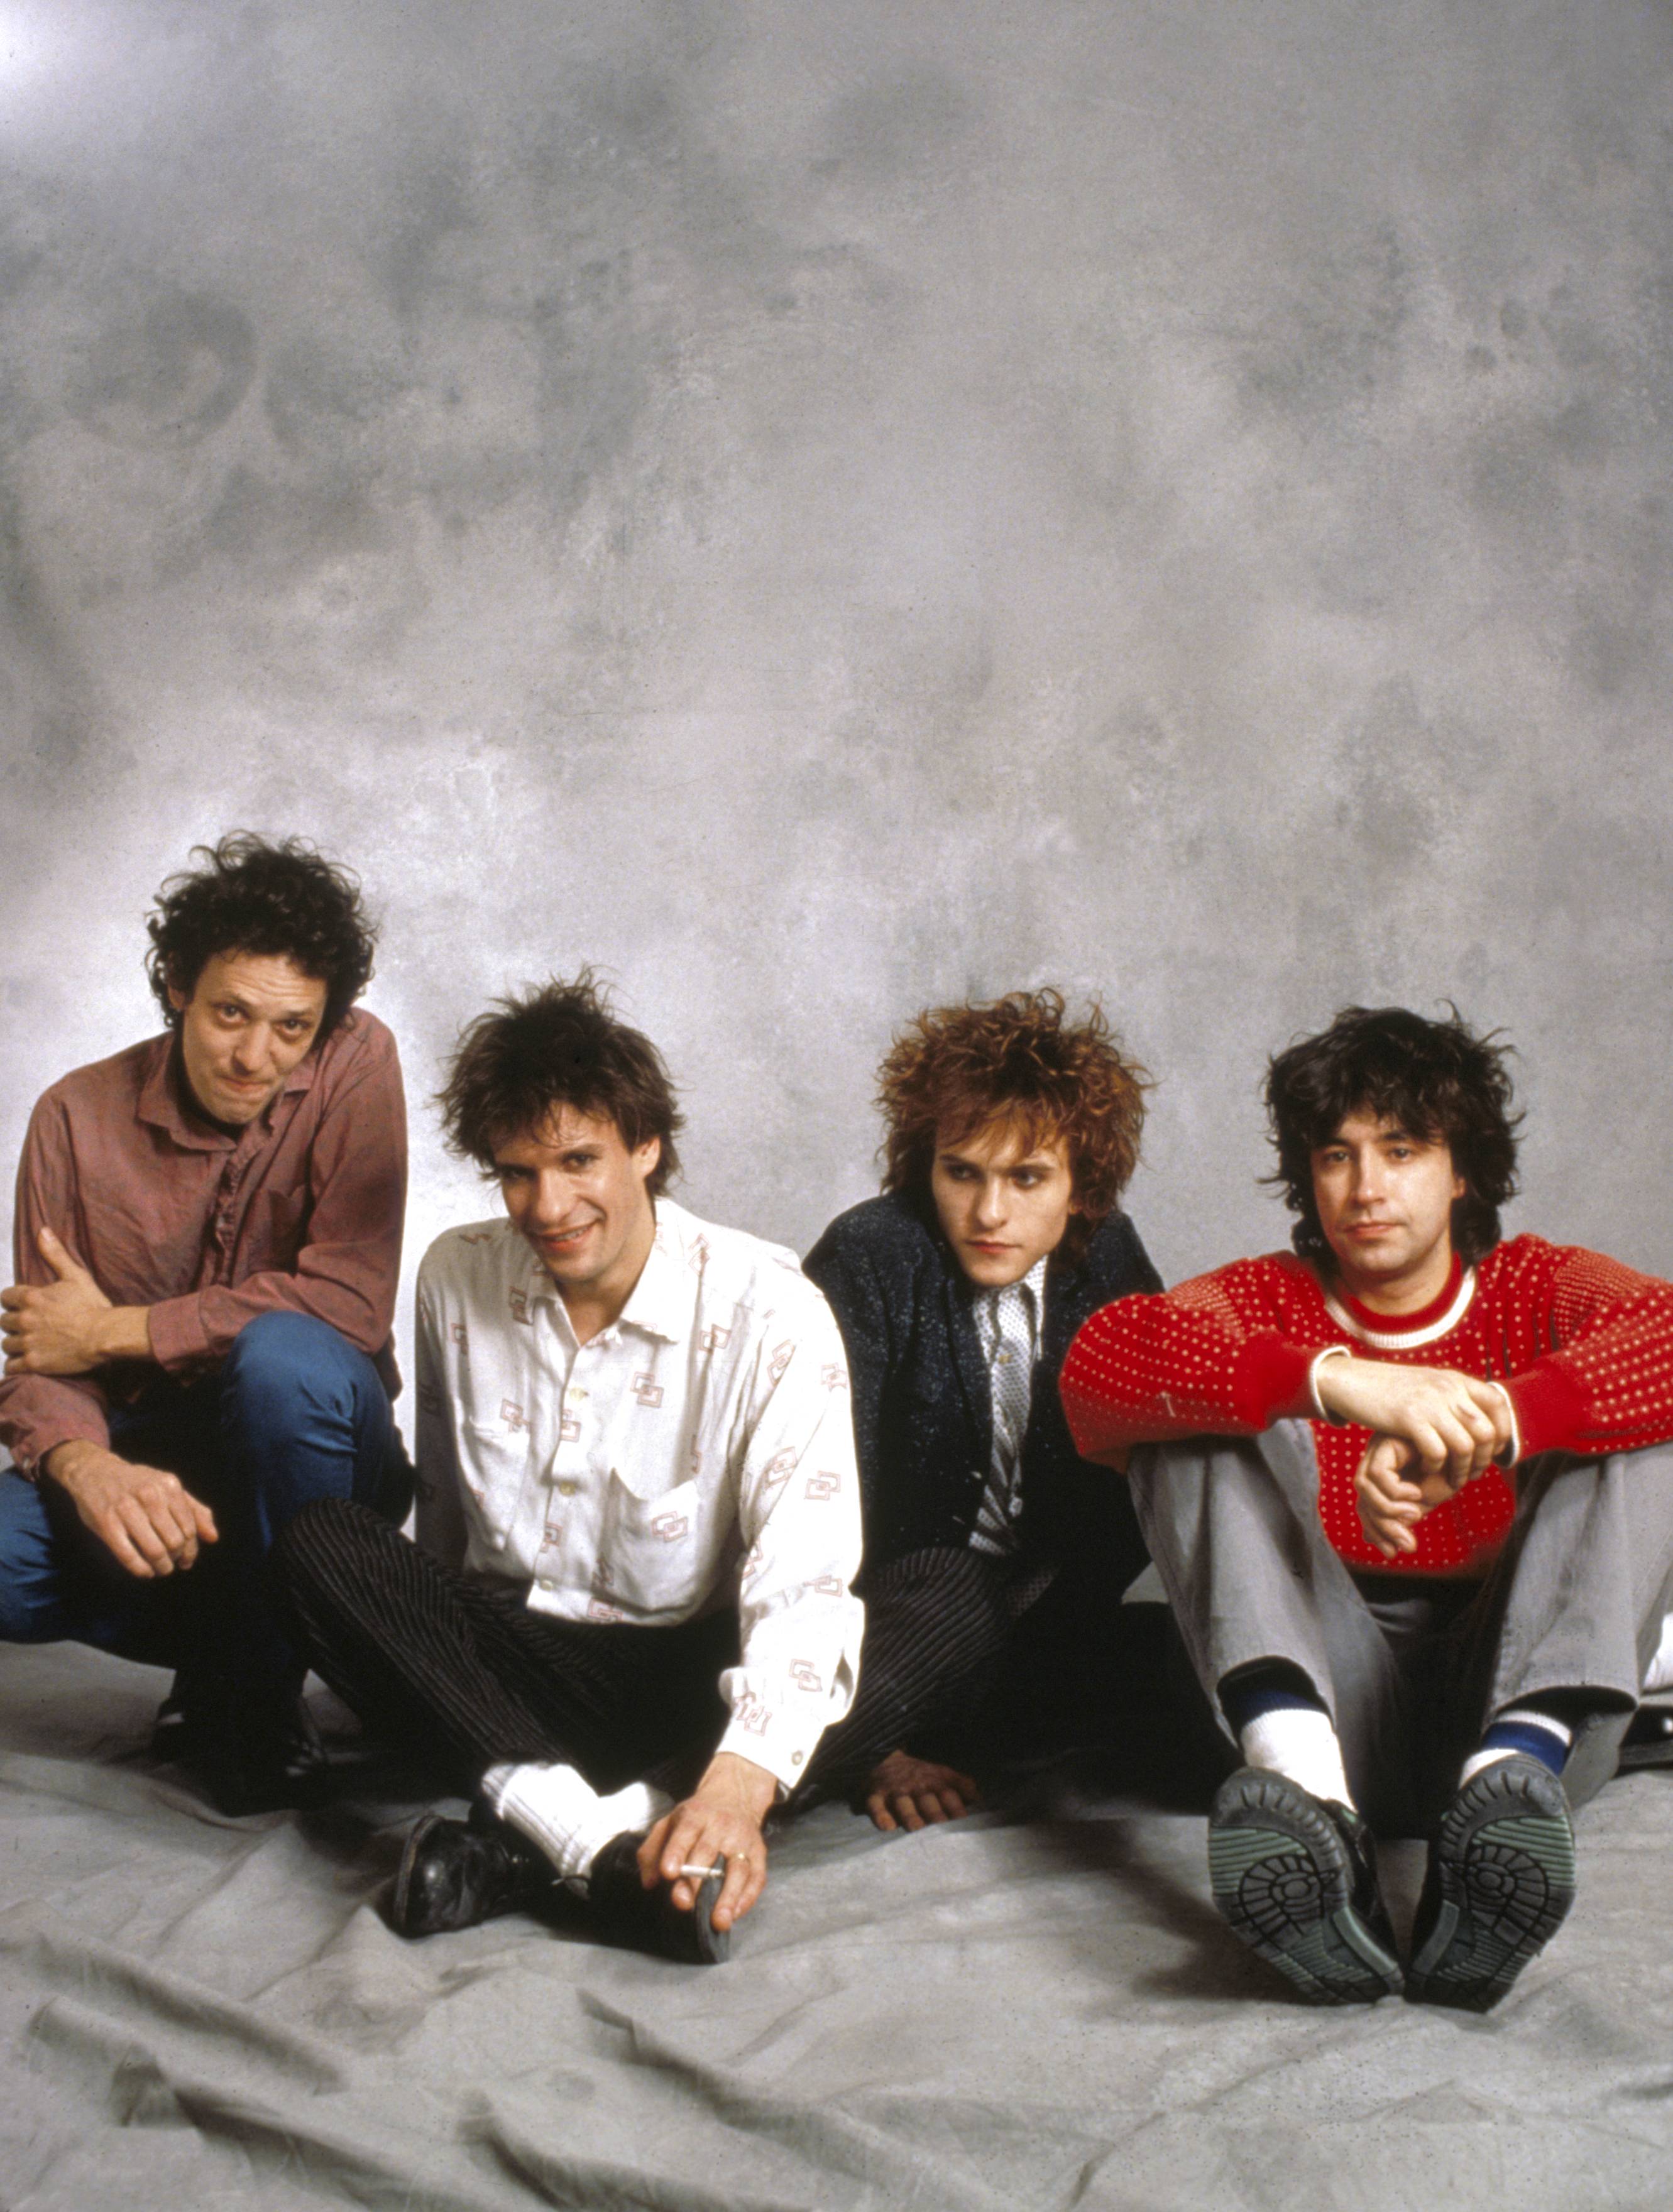 The Replacements: Our 1987 Feature, <i>
<p>Jesperson likewise had been with the group since the beginning. In 1980, less than a month after their first gig, he signed them to Twin/Tone Records, which he had cofounded, and immediately became their manager. But when they jumped to Warner Brothers in 1985, they moved beyond his managerial depth. Jesperson and the band went their separate ways last August, a move Westerberg feels was, in many ways, harder to digest than the decision fire Stinson.</p>
<p>“Peter was like a fifth member of the band, and in the beginning, I’d give him a lot of credit for our success. He was invaluable. When we had no money at all, he would always buy us drinks and lunch and things like that. He kept us together in the beginning. And then we grew up a little. We were young when we started—I was 19, Tommy was 13, and he was six or seven years older, and he could calm us down when we needed it. Consequently, we grew up to the point where we could call ’em ourselves. We didn’t need a ‘dad’ or a ‘big brother’ anymore; we needed someone to guid our career more than we needed someone to take care of us.”</p>
<p>Warner Brothers provided the career-guiding management to replace Jesperson. To fill the void Stinson left, the band chose Bob “Slim” Dunlap, longtime sidekick of local legend Curtiss A. His “audition” consisted of an afternoon of drinking beer.</p>
<p>“Slim is more like a fourth member of the band than a hired gun,” Westerberg says. “We originally thought that it would be a good idea to get a hot guitar player and be the Replacements and…Joe Blow. As it is now, it’s like the Replacements with a new guy who isn’t a <i>great</i> guitar player, isn’t a <i>great</i> singer, just as we are not great at what we do, and he fits in perfectly. He’s working out good, but the tale will really be told when we play live.”</p>
<div class=